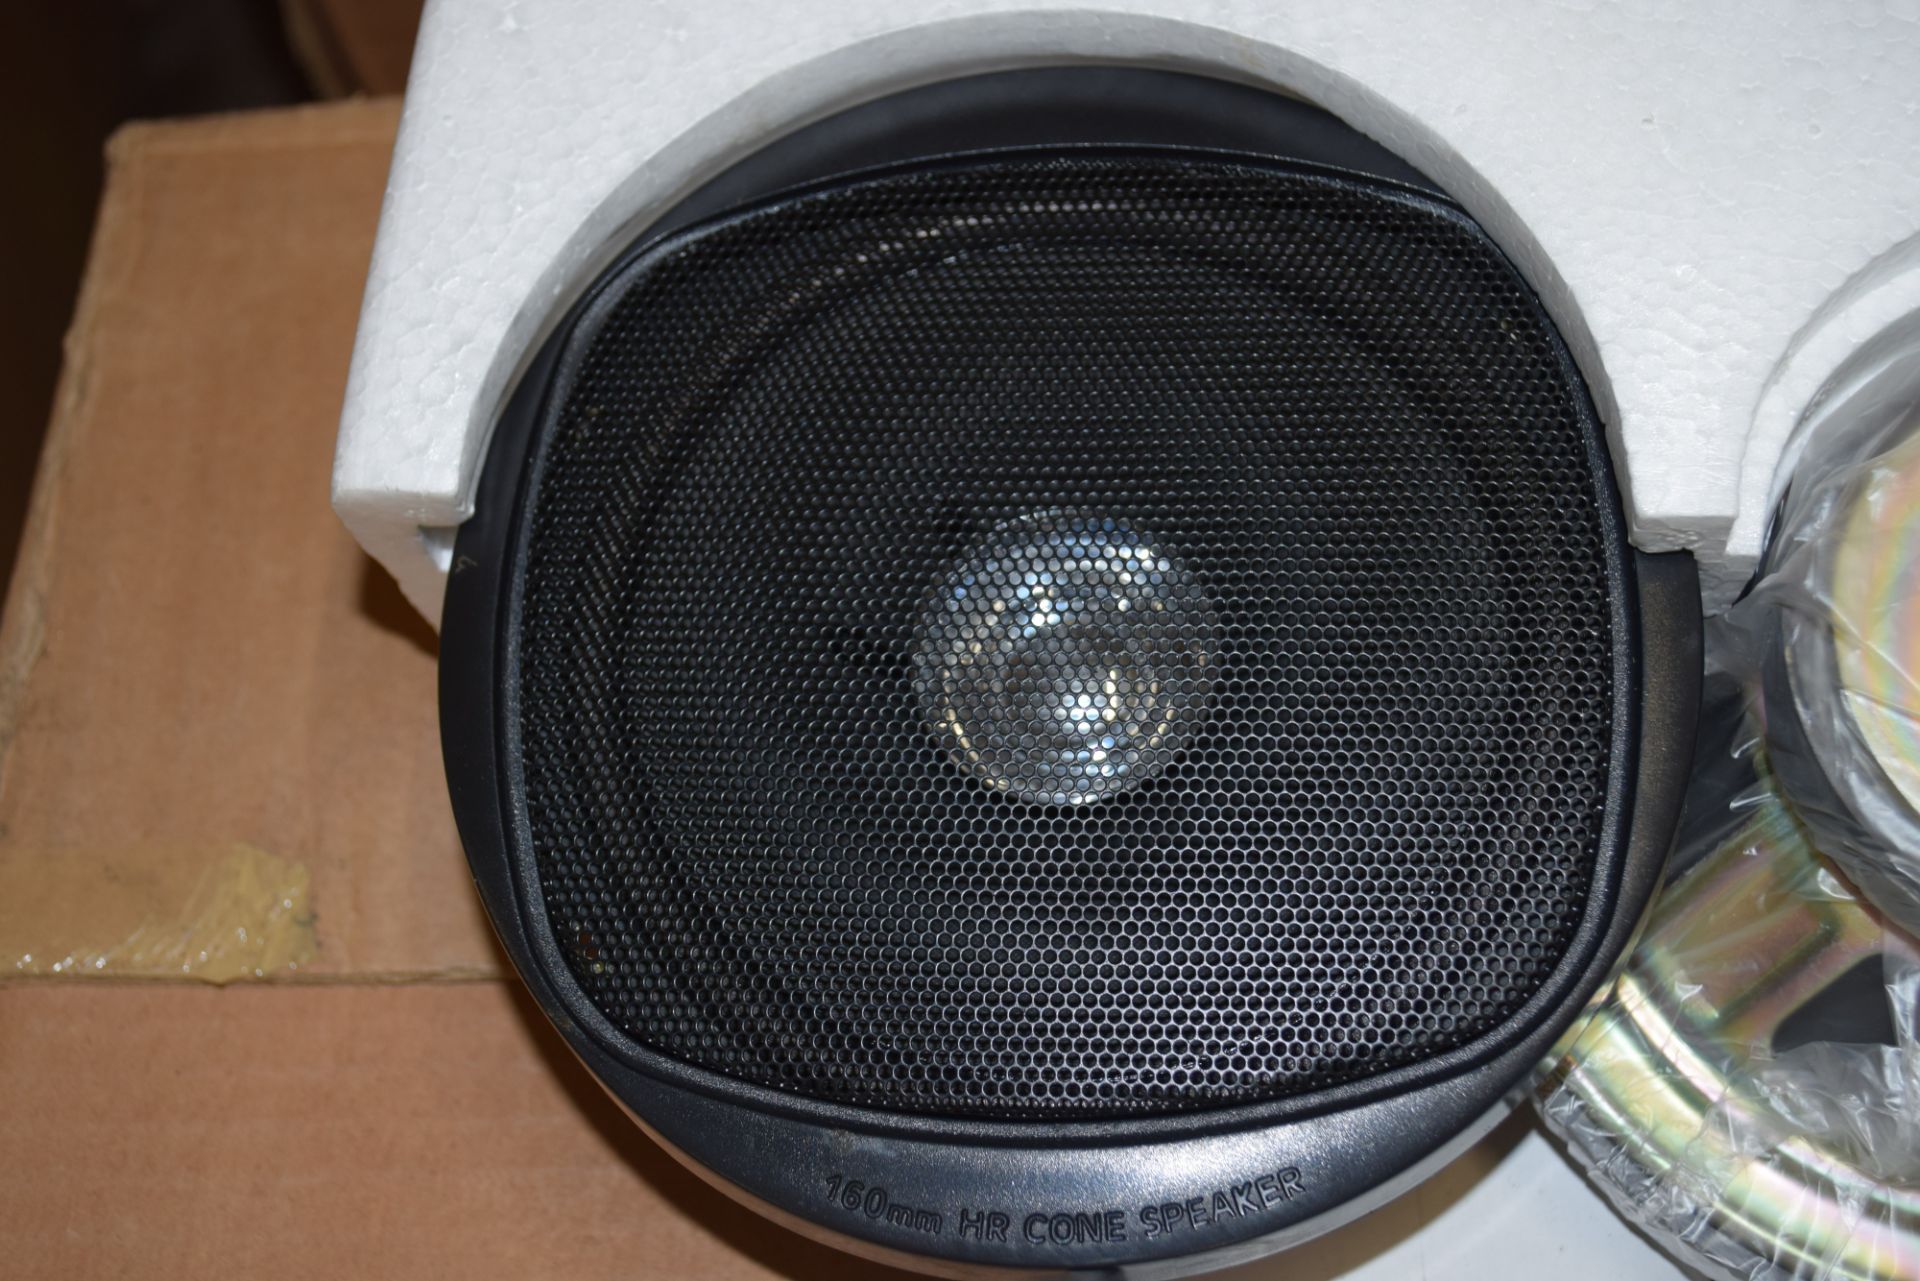 BOX CONTAINING 10 PAIRS OF HI TECH STEREO CAR SPEAKERS, MODEL NO 2C160, SIZE 6 1/2 INCH, POWER